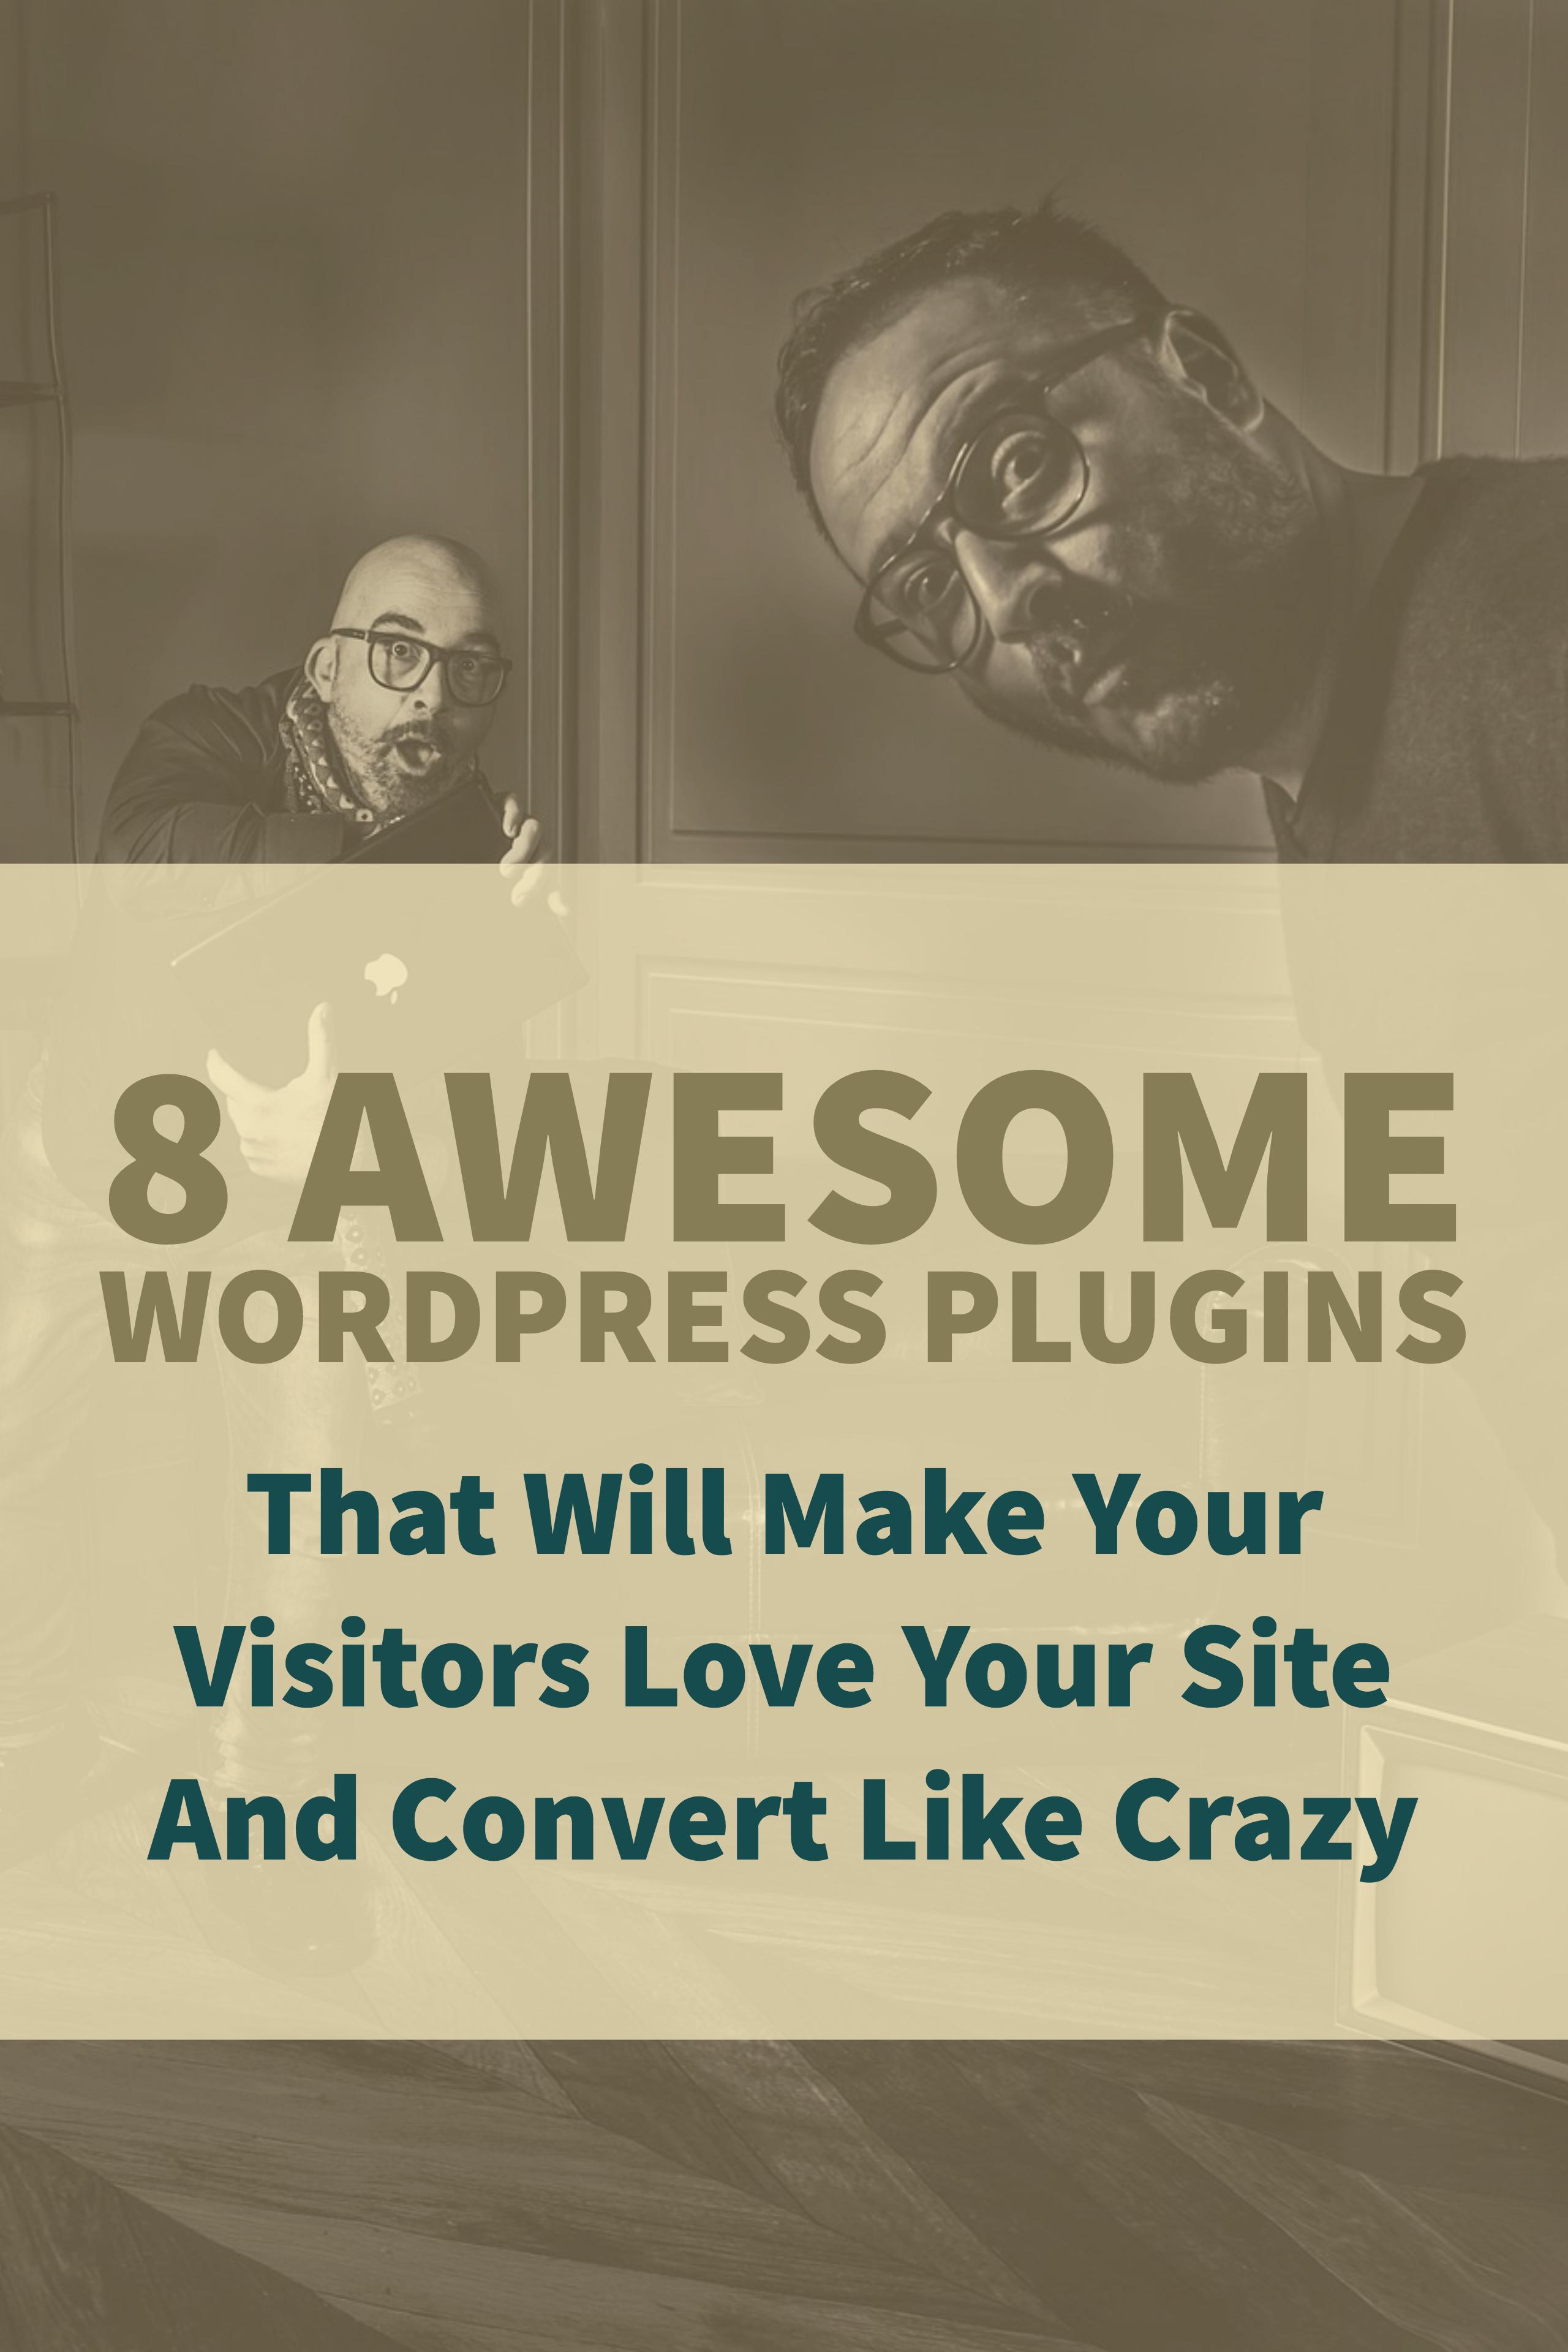 8 Awesome WordPress Plugins that will make visitors love your site and convrt like crazy! Use these WordPress plugins now to improve your user experience and convert webvisitors into leads and sales.